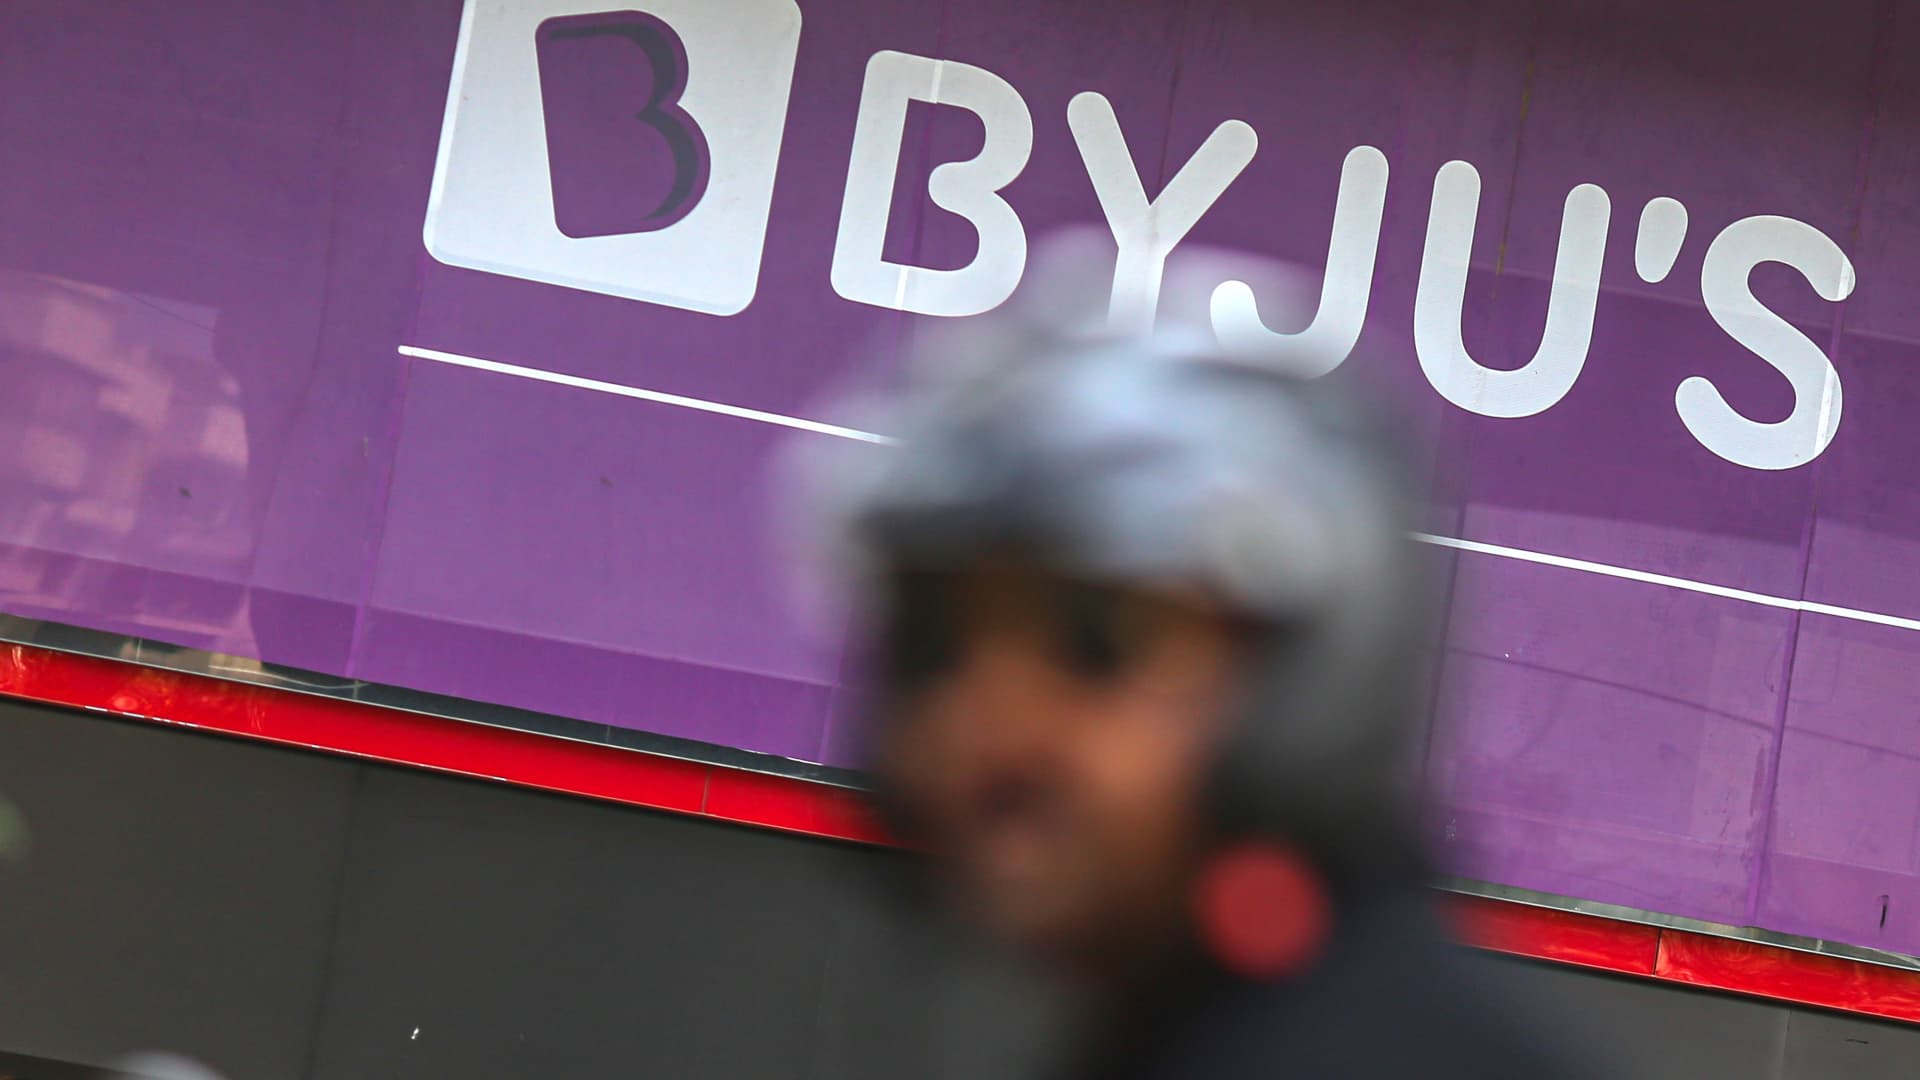 India’s Byju’s lost more than $20 billion in valuation — what went wrong with the startup darling?